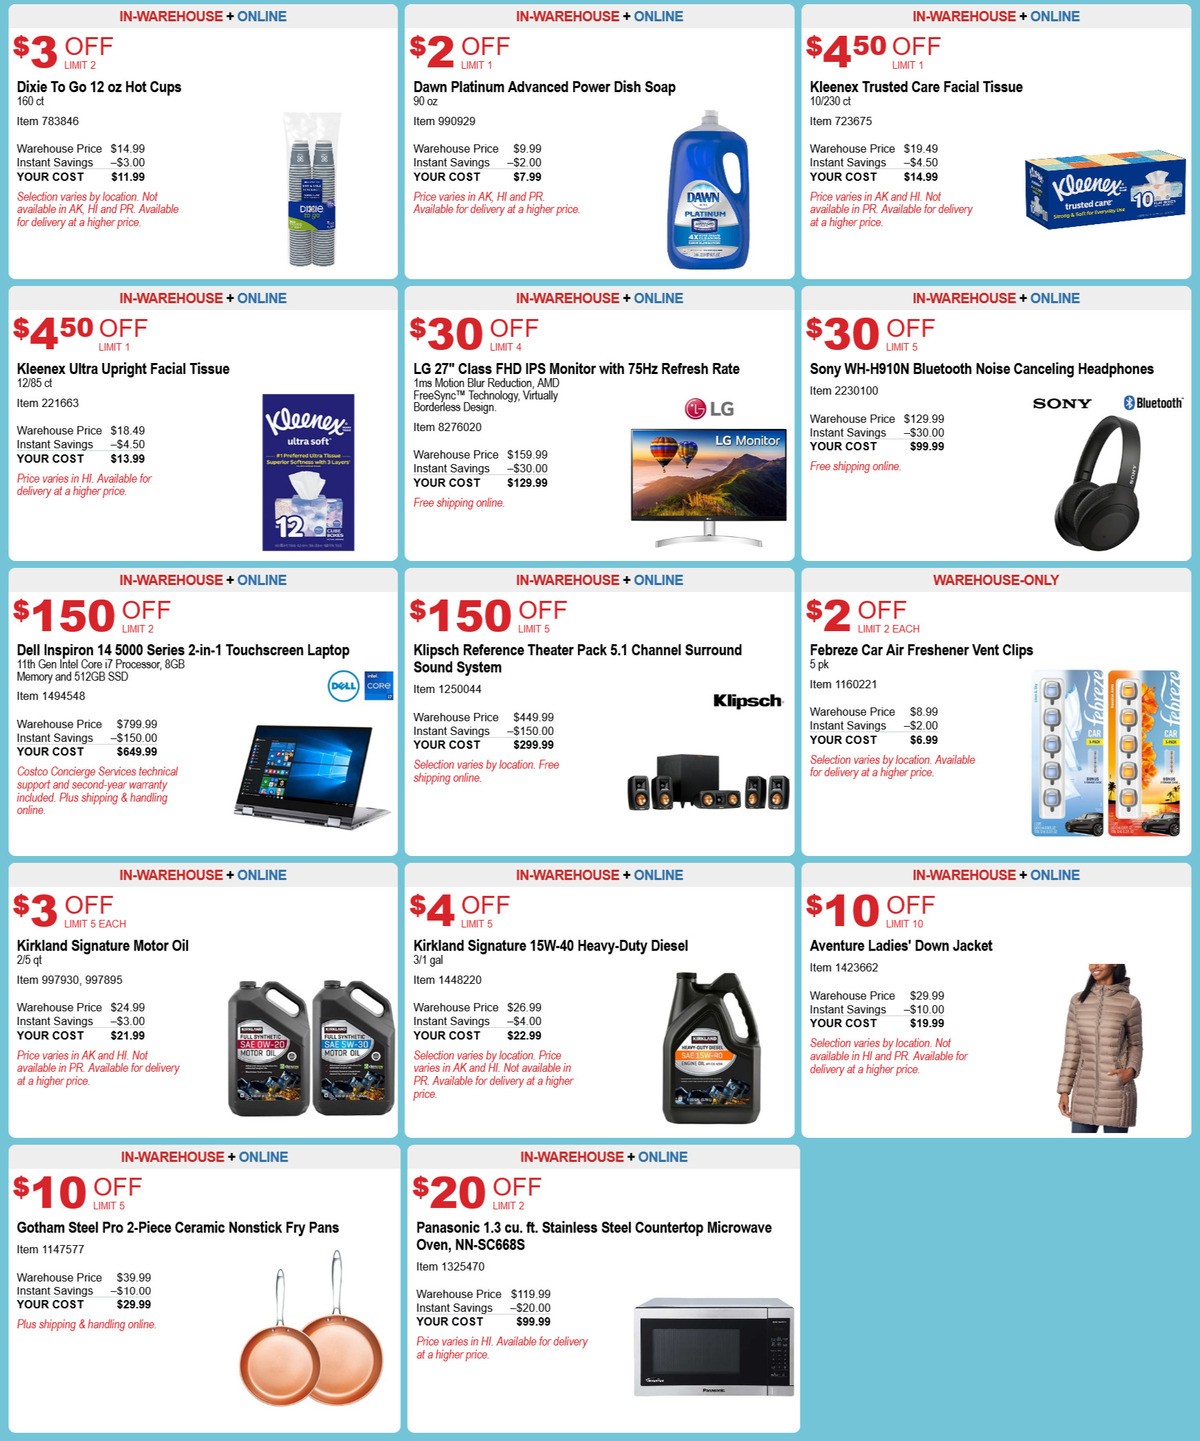 Costco Hot Buys Weekly Ad from January 23